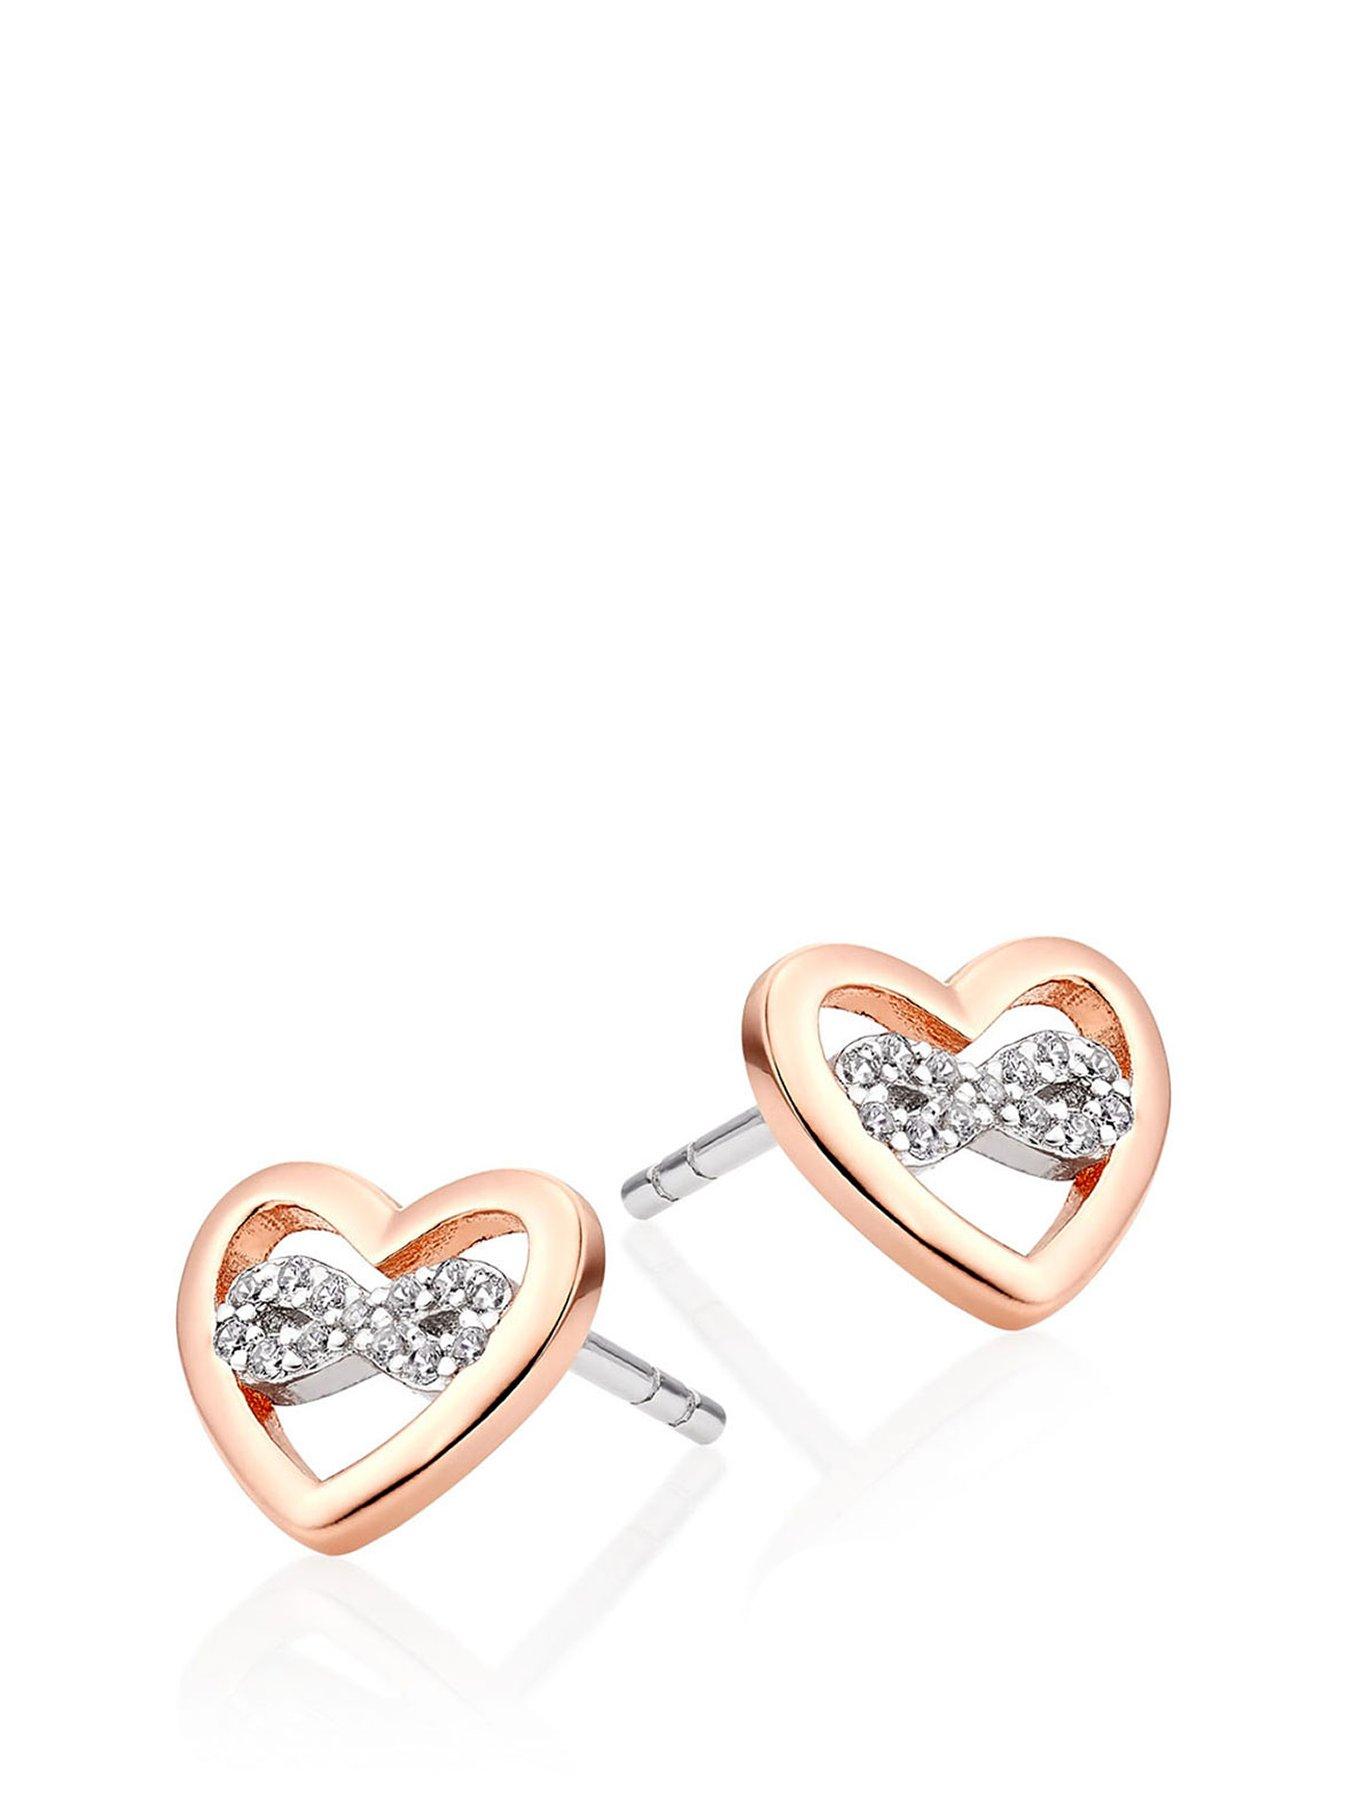  Silver Rose Gold Plated Cubic Zirconia Infinity Heart Earrings